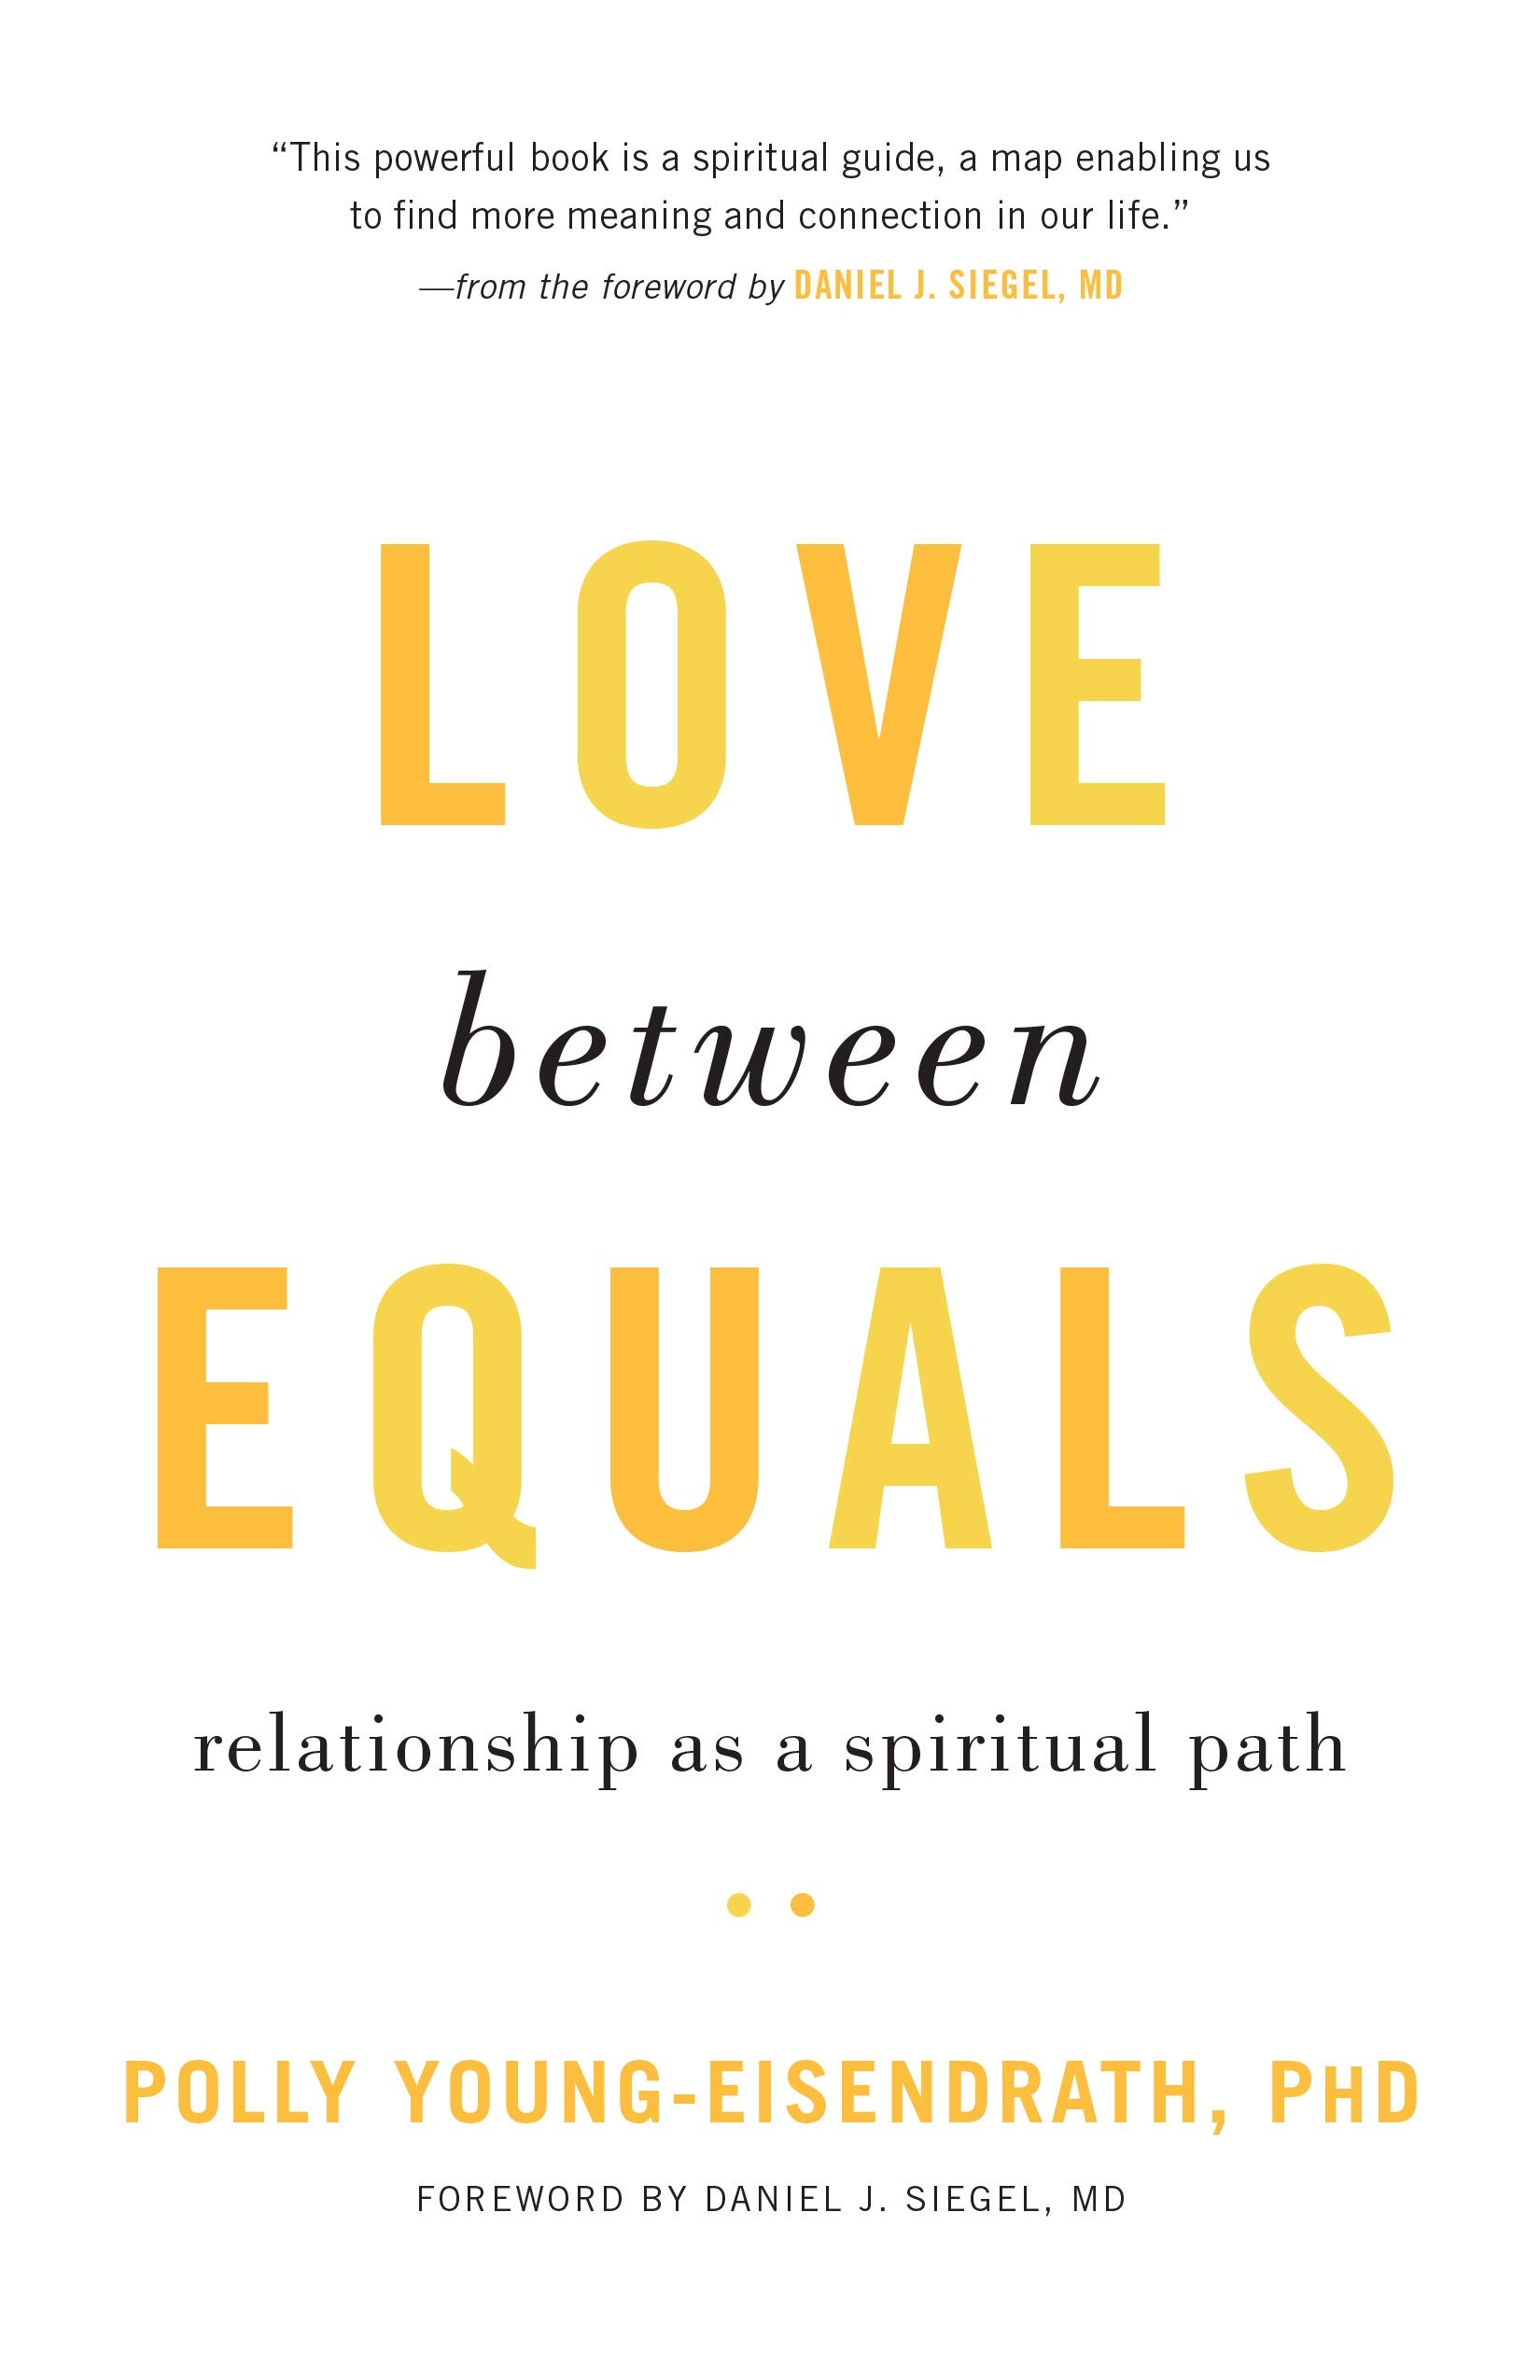 Love between Equals | Polly Young-Eisendrath